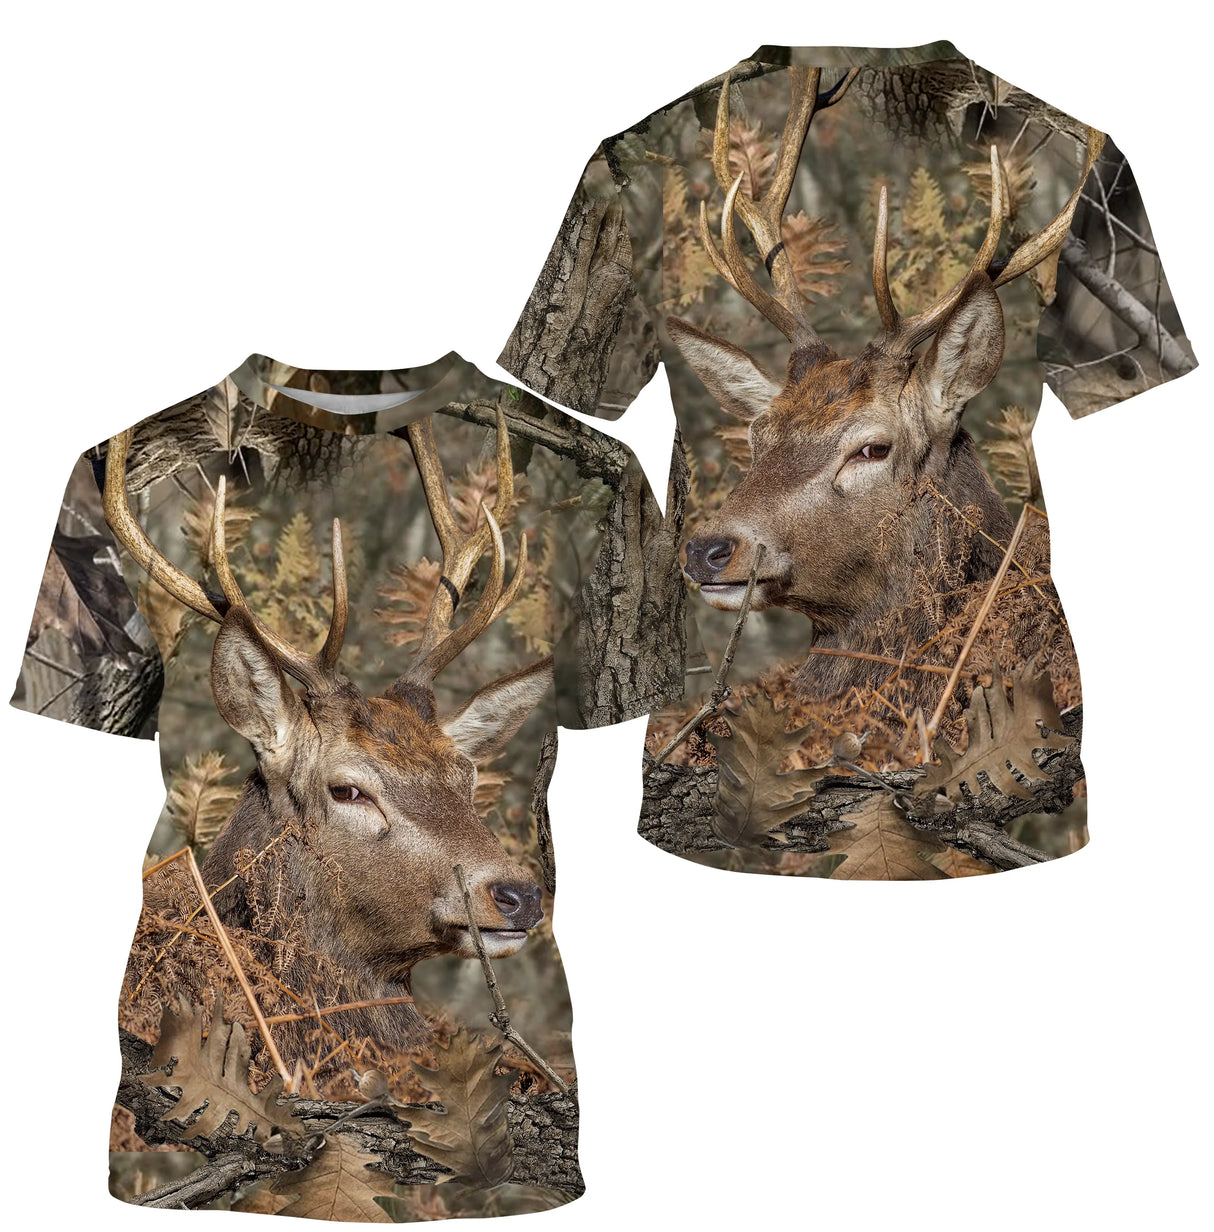 Chasse au Cerf, T shirt Chasseur, Camouflage, Vêtements Chasse - CTS24052224 T-shirt Anti UV à Capuche T-shirt All Over Unisexe